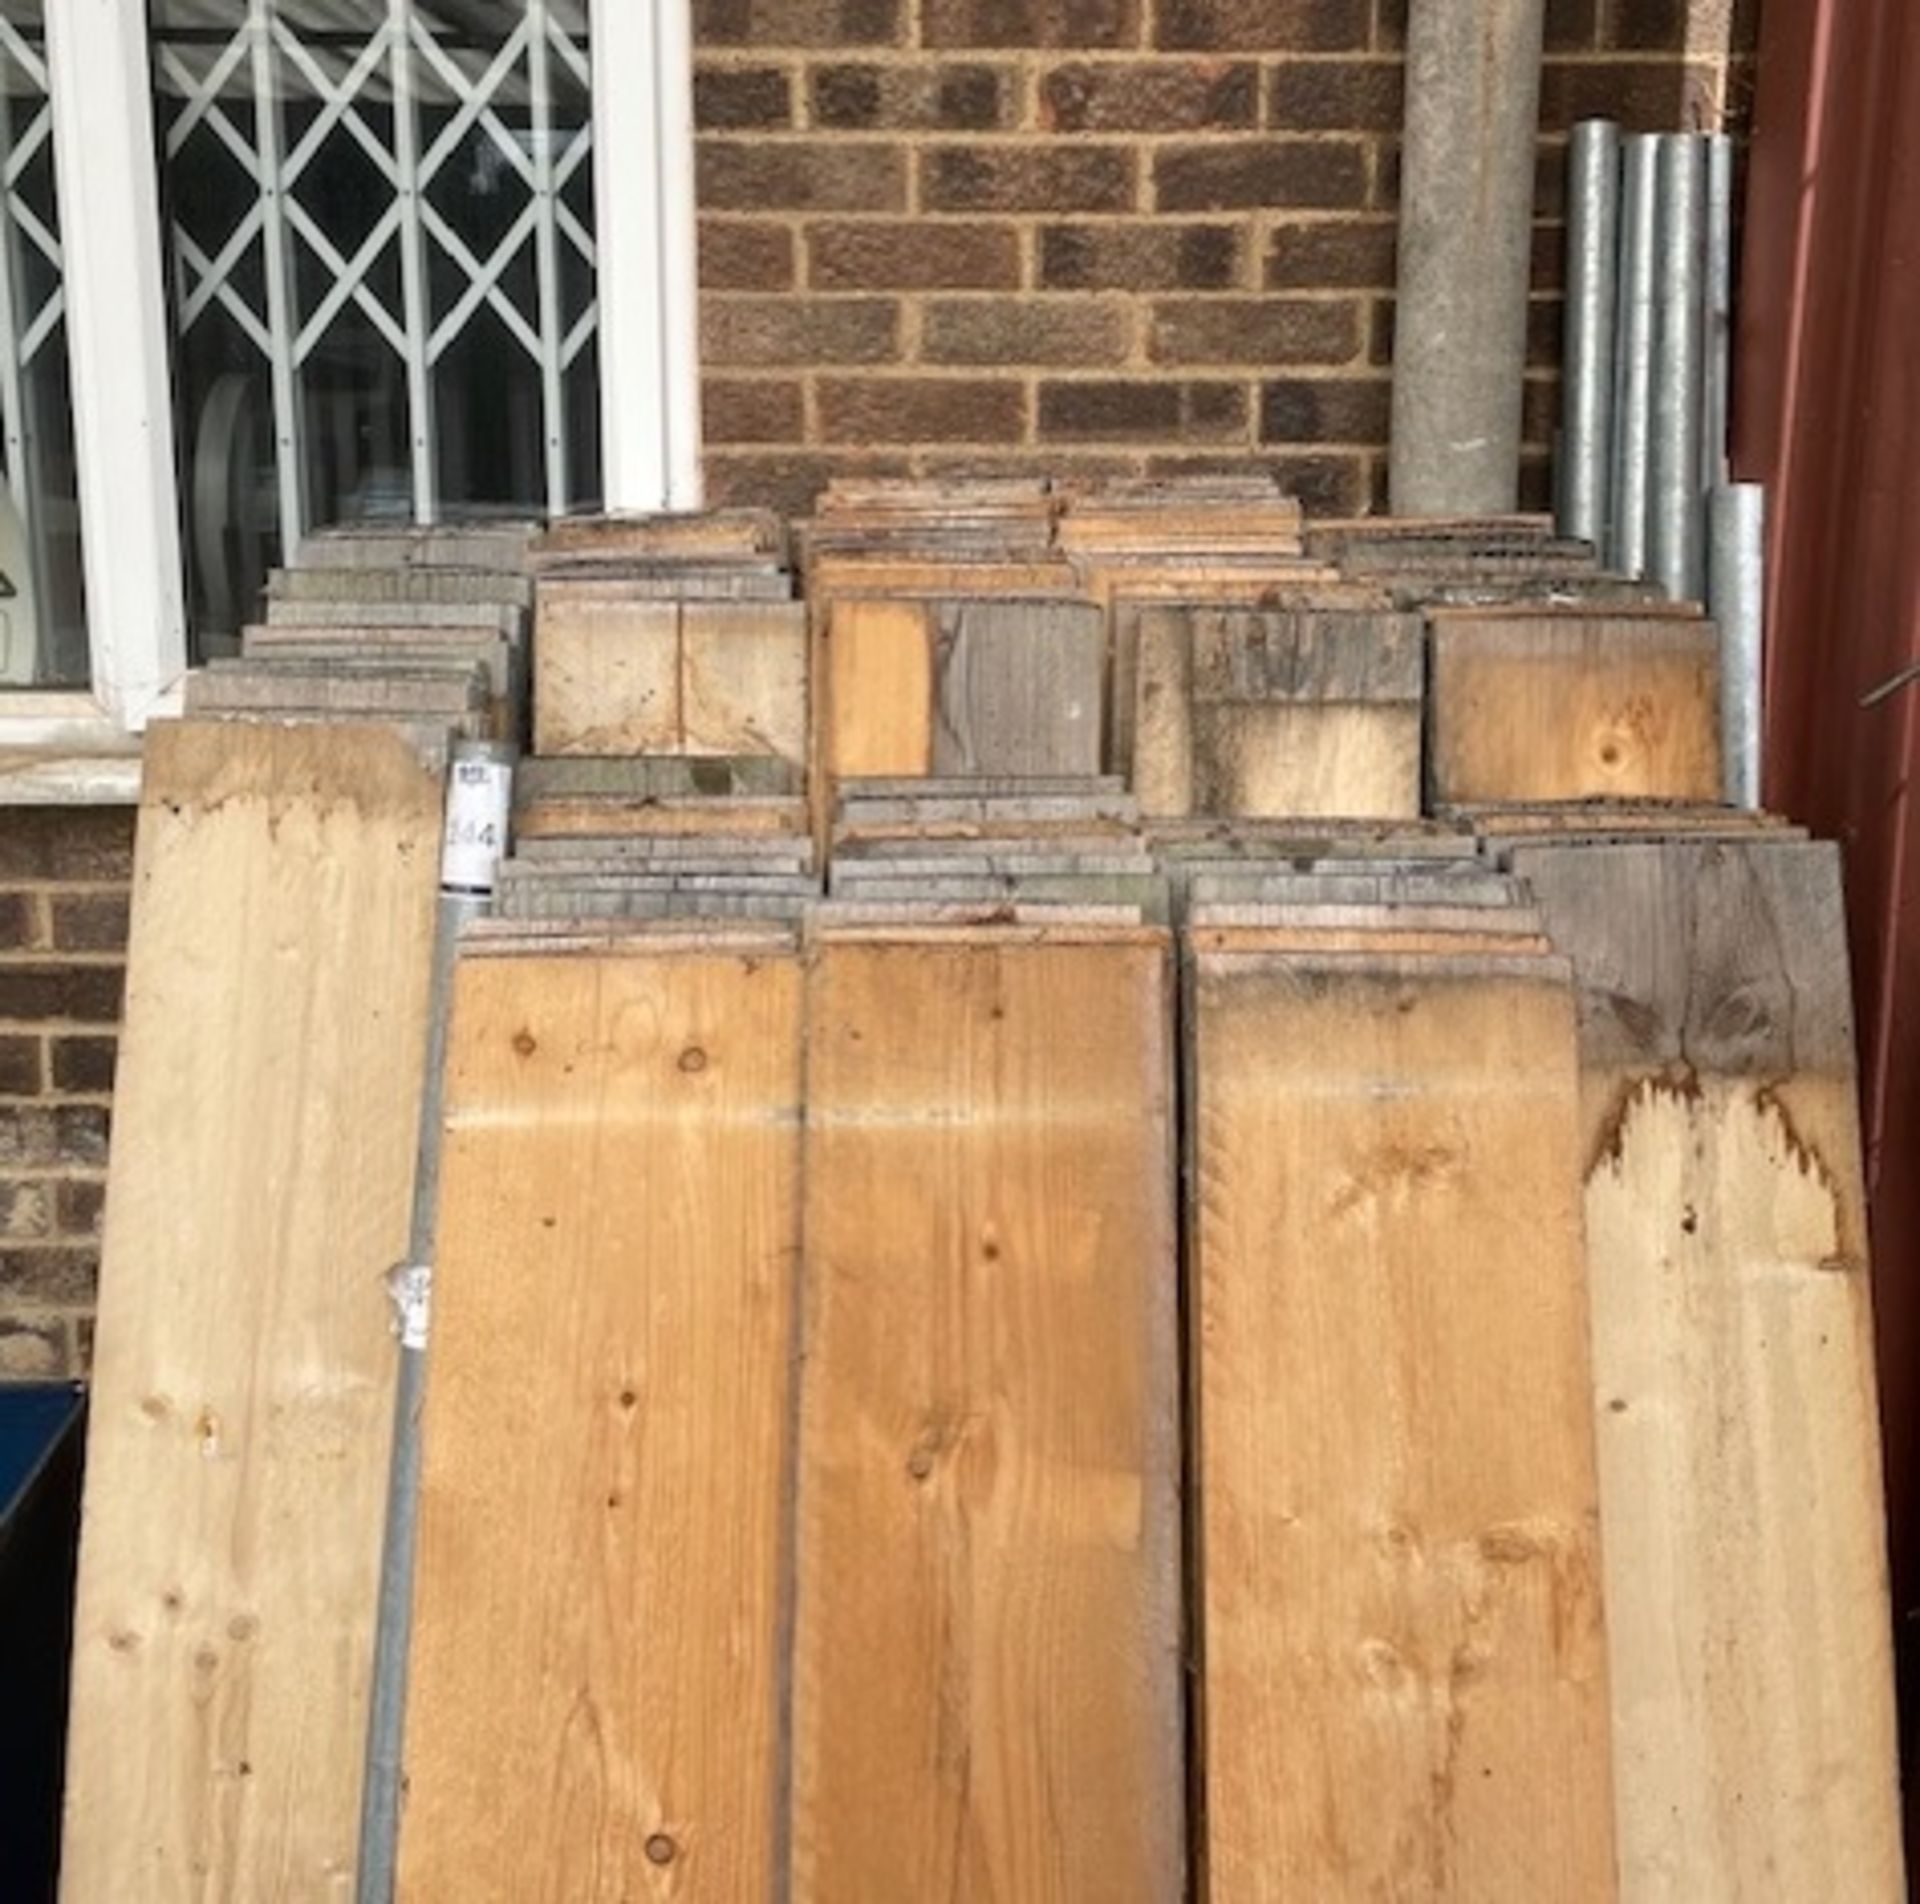 Quantity of Galvanised Scaffold Tube, Fittings, Boards & Base Plates (Rear Yard) (Location: Earls - Image 2 of 4